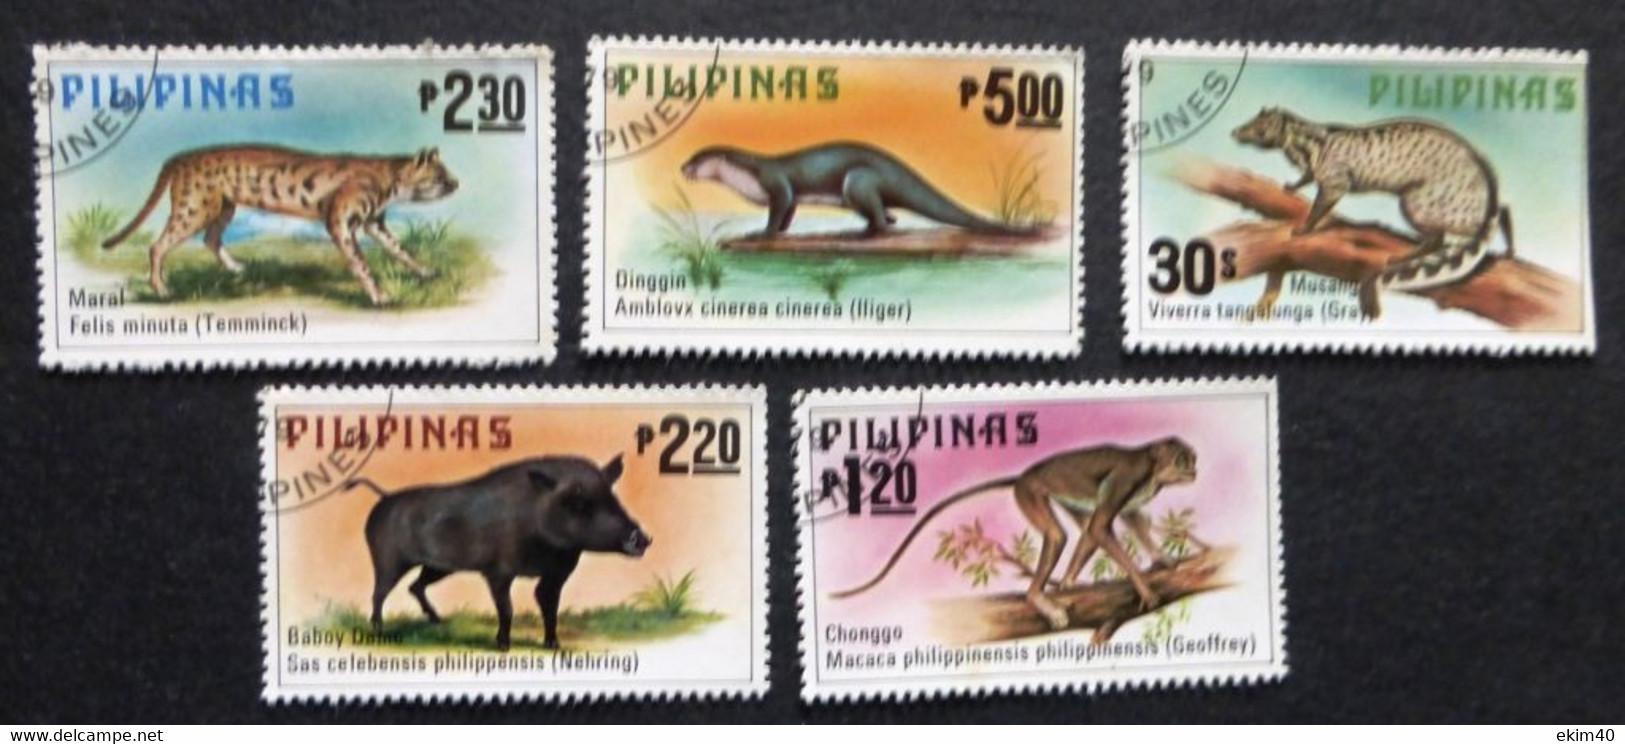 Selection Of Used/Cancelled Stamps From Philippines Wild Animals. No DC-373 - Gebruikt